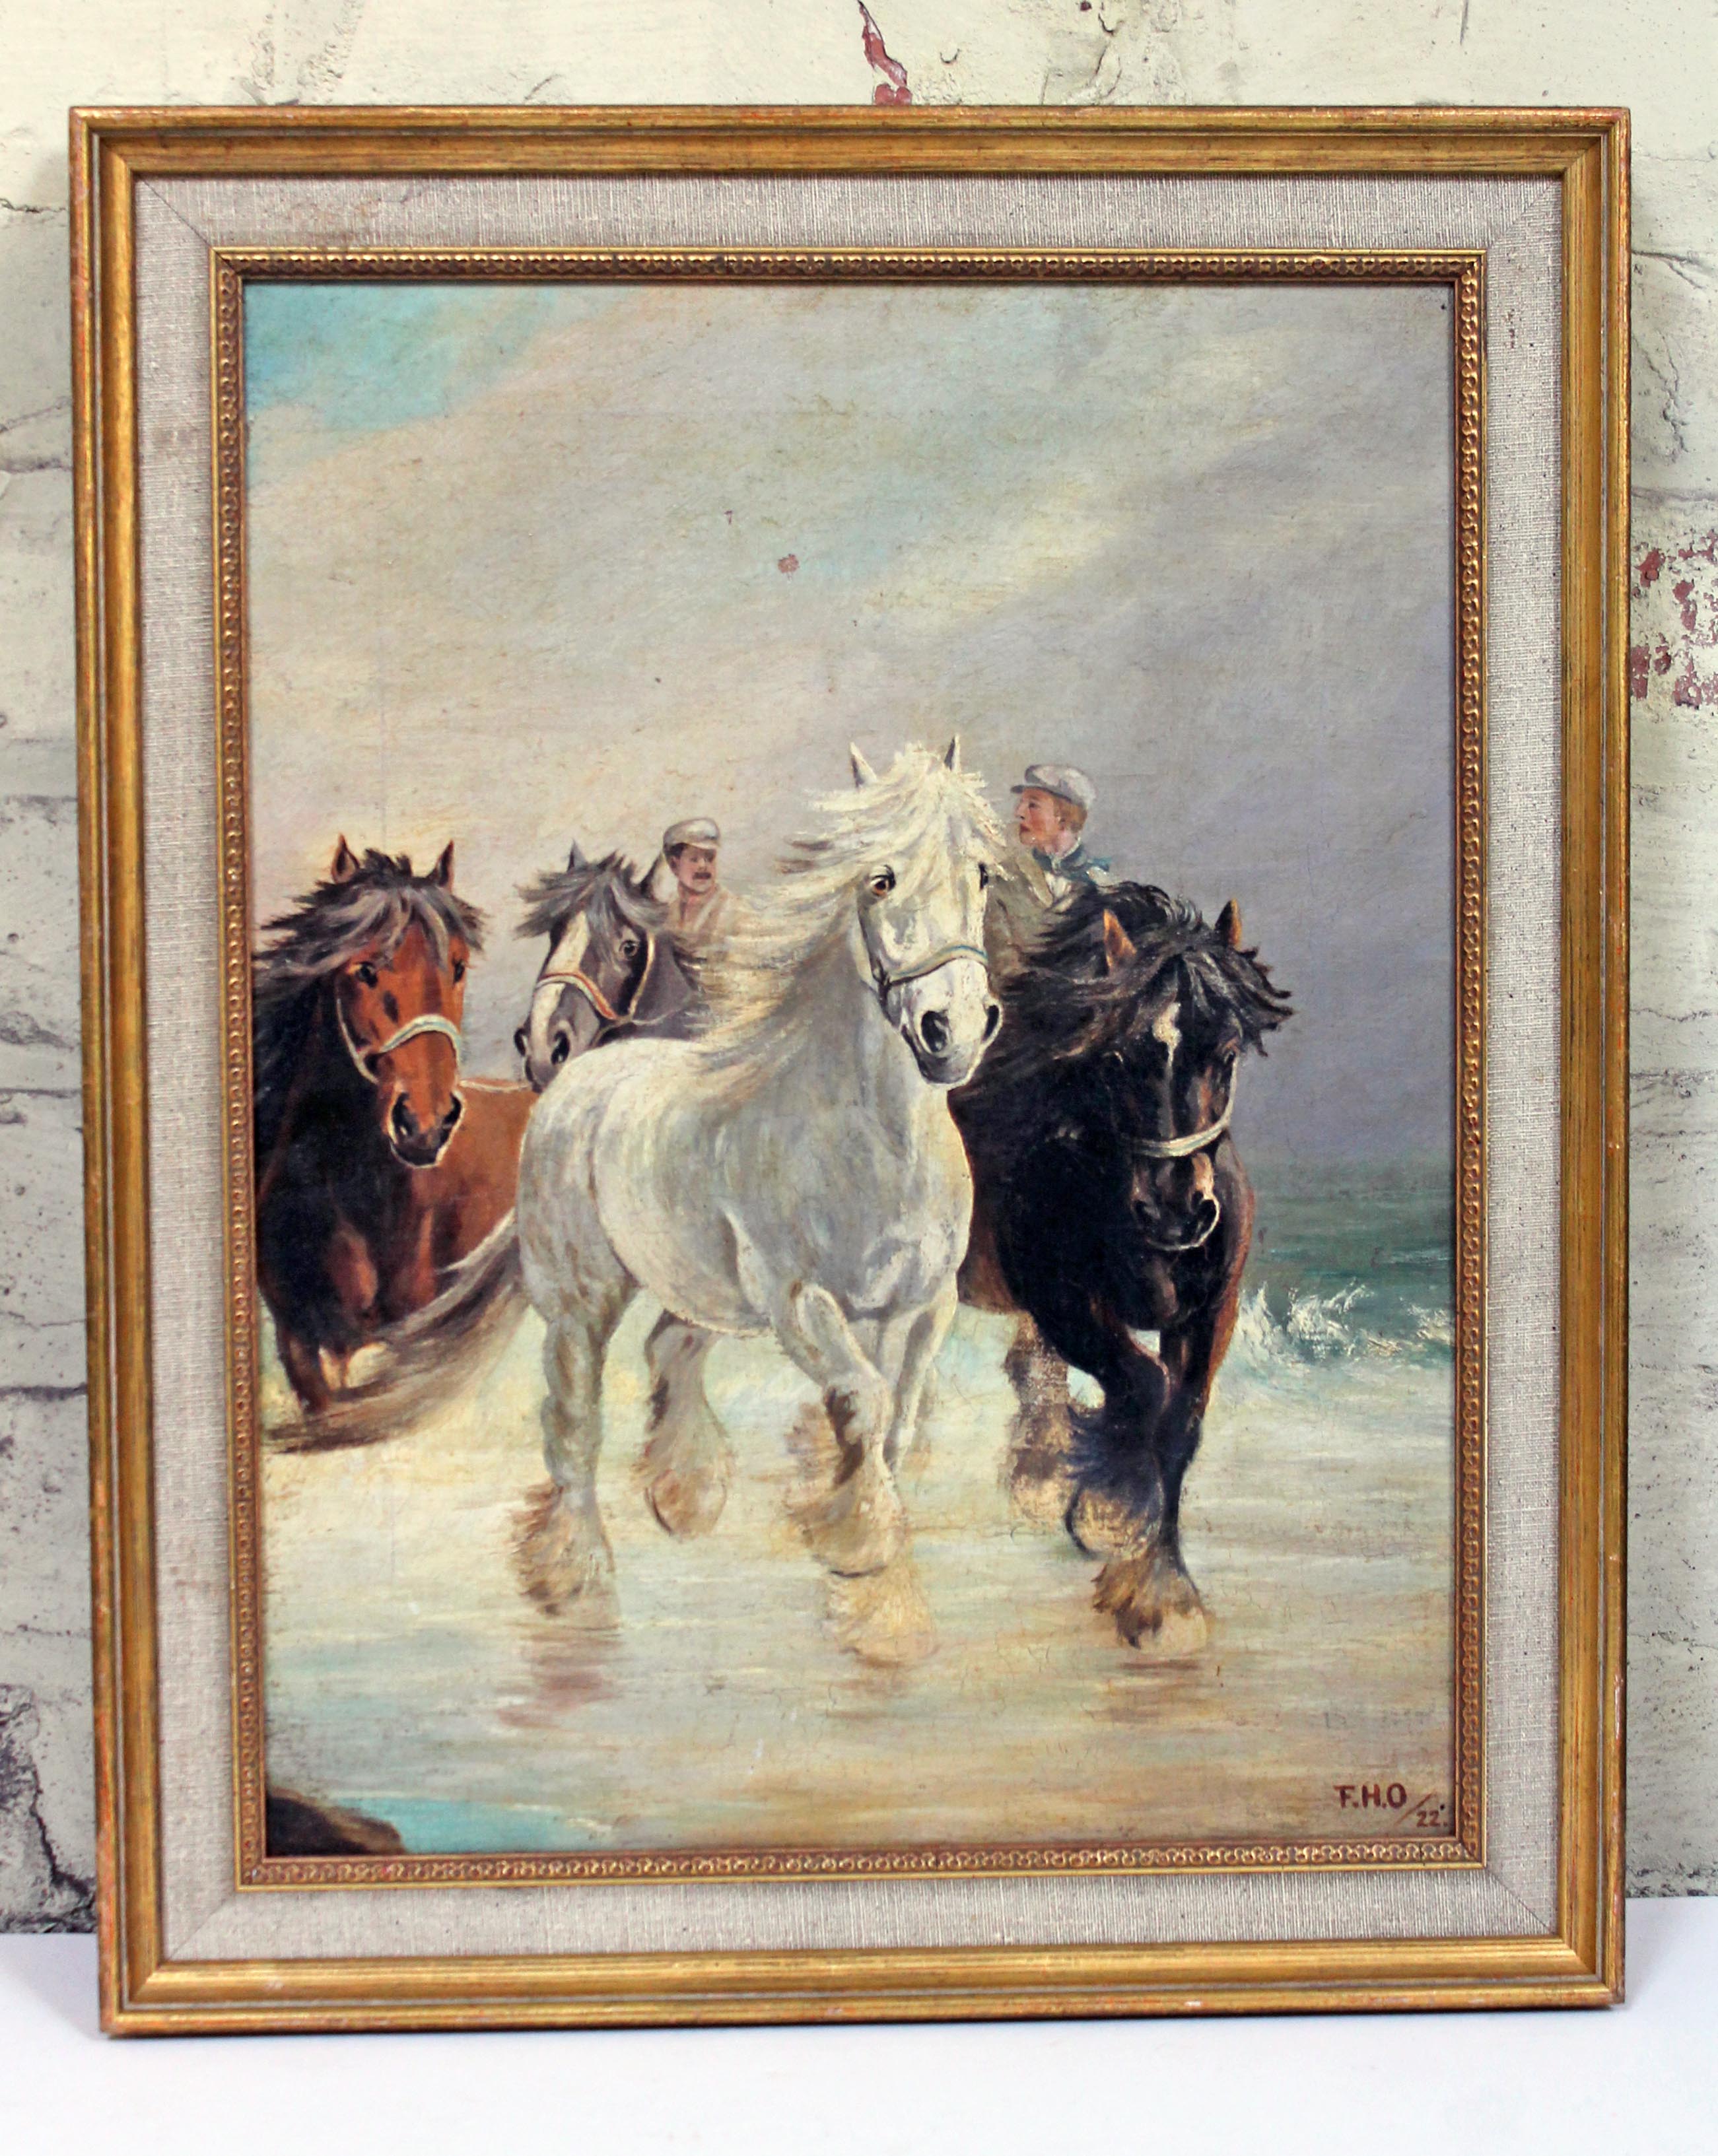 Early 20th Century School, galloping horses, oil on canvas, 34cm x 44cm, monogrammed 'F.H.O' and